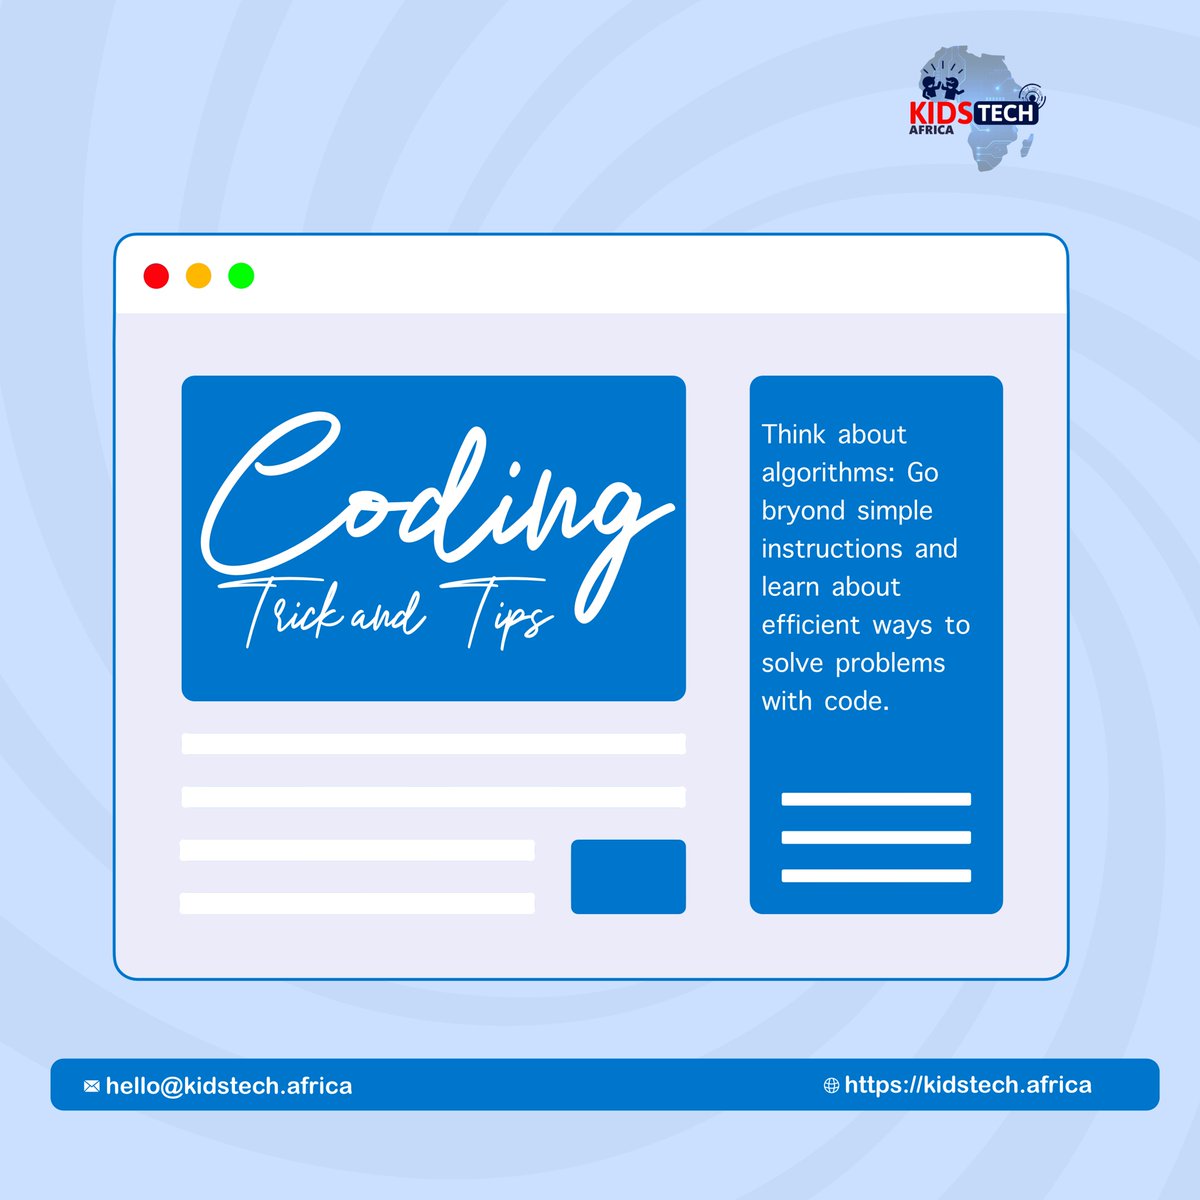 Here's  another episode of our coding 'Tricks and Tips'

Master Algorithms: Dive deeper than basic instructions to discover efficient problem-solving through code.
#codingtricks #kidstechafrica #coding #javascript